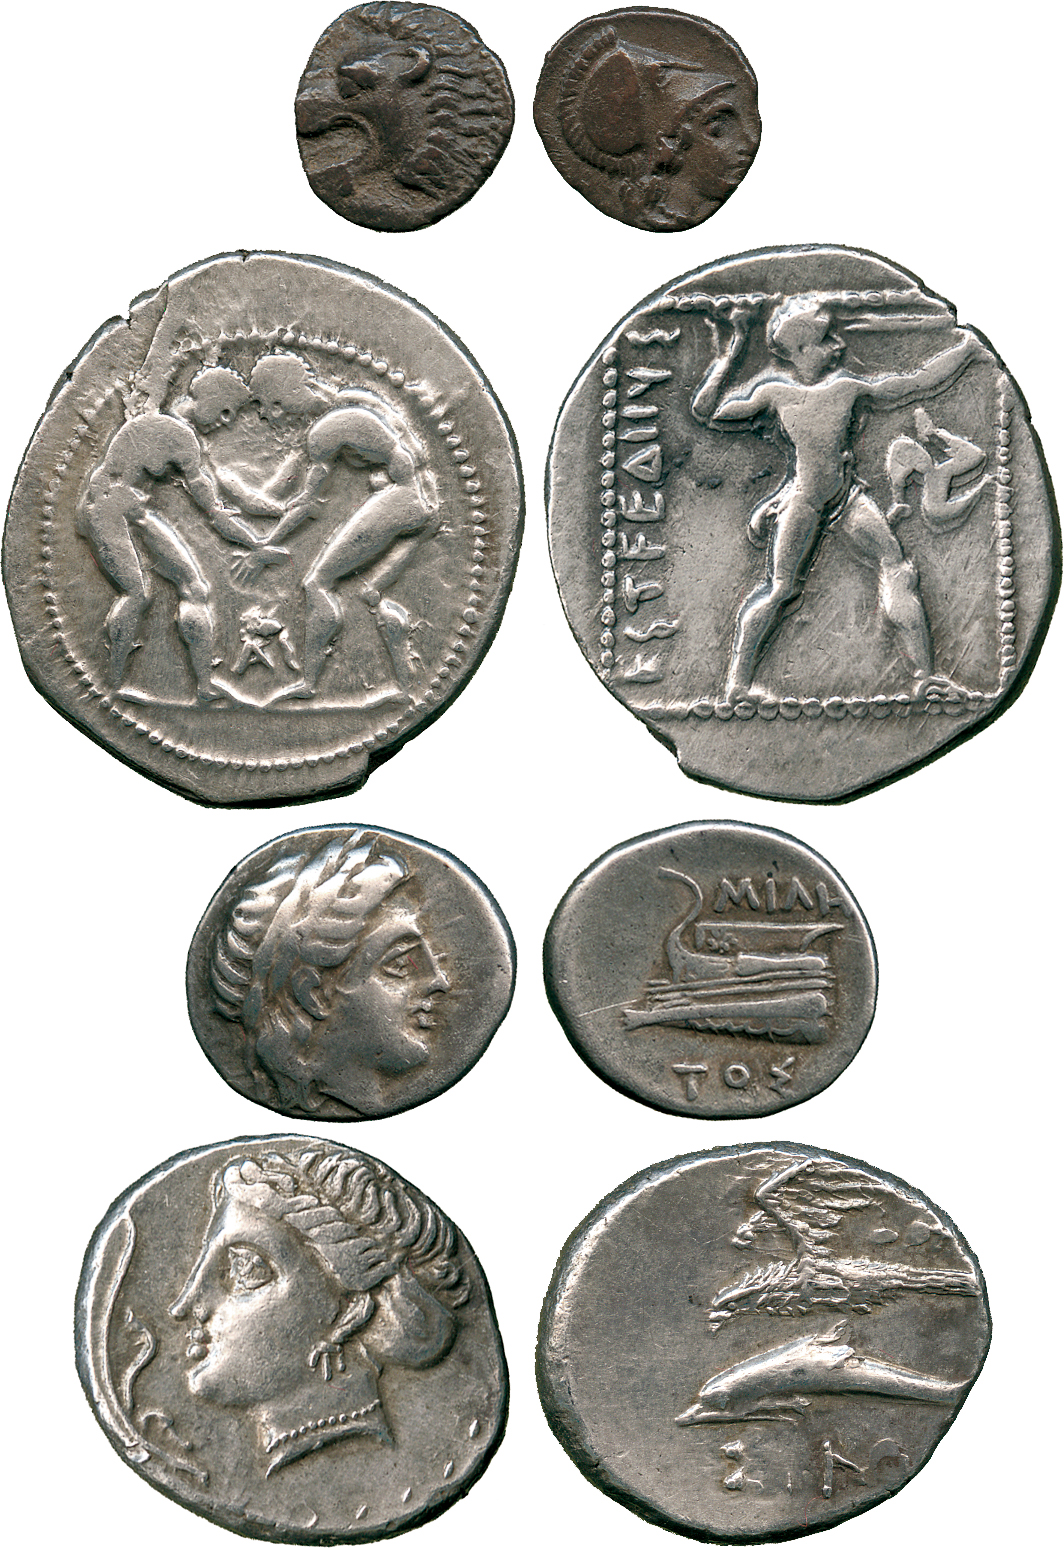 ANCIENT COINS, GREEK COINS, Paphlagonia, Sinope (c.330-300 BC), Silver Drachm, head of nymph